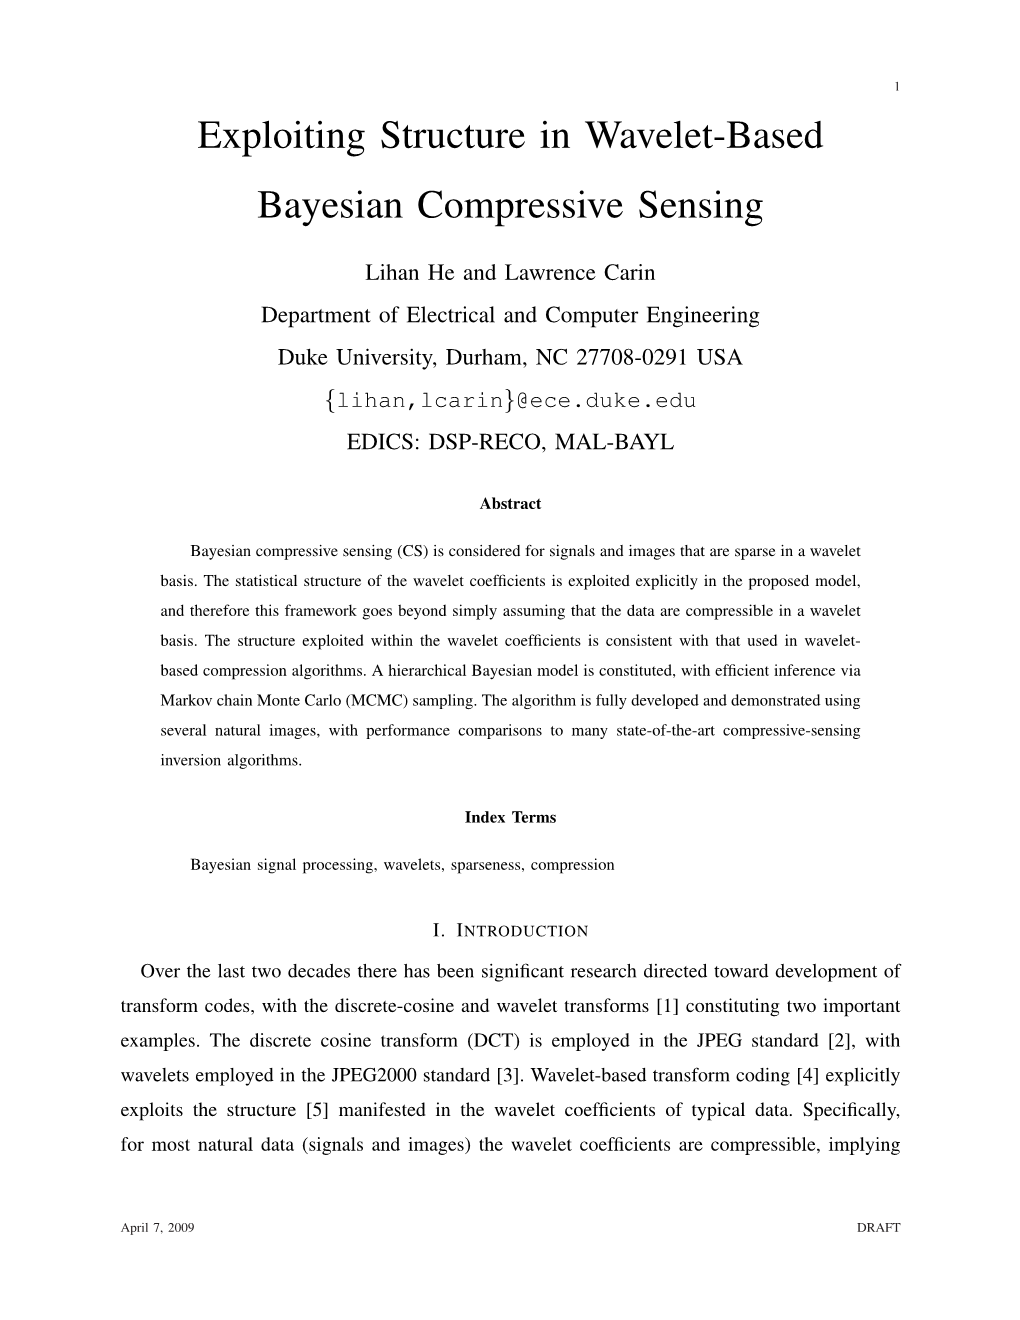 Exploiting Structure in Wavelet-Based Bayesian Compressive Sensing